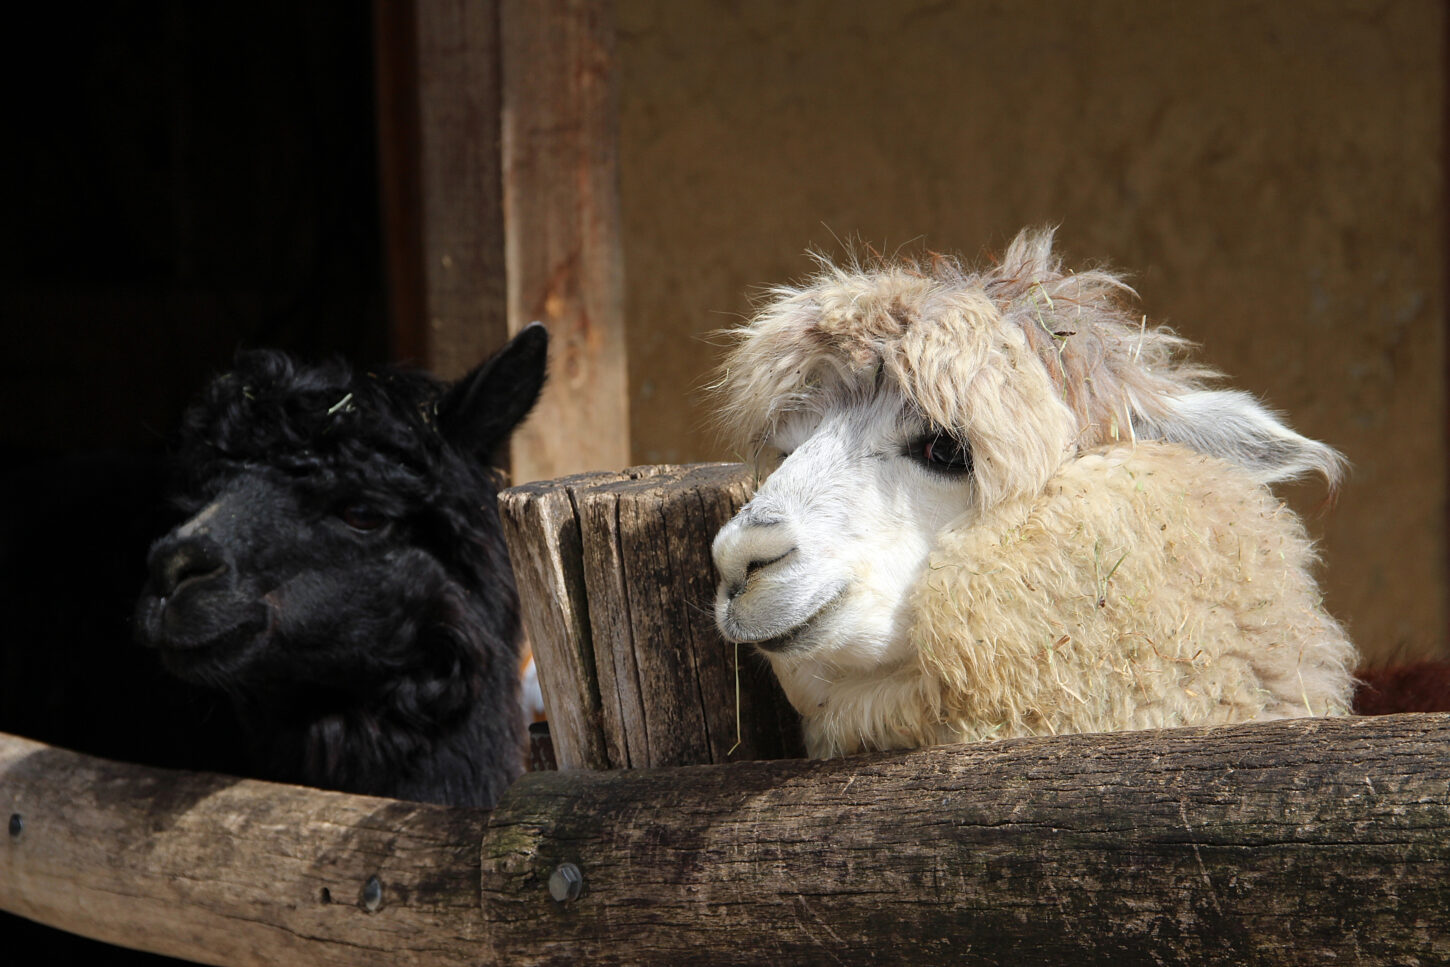 Two smiling alpacas, one black and one white, in Salzburg Zoo, Austria